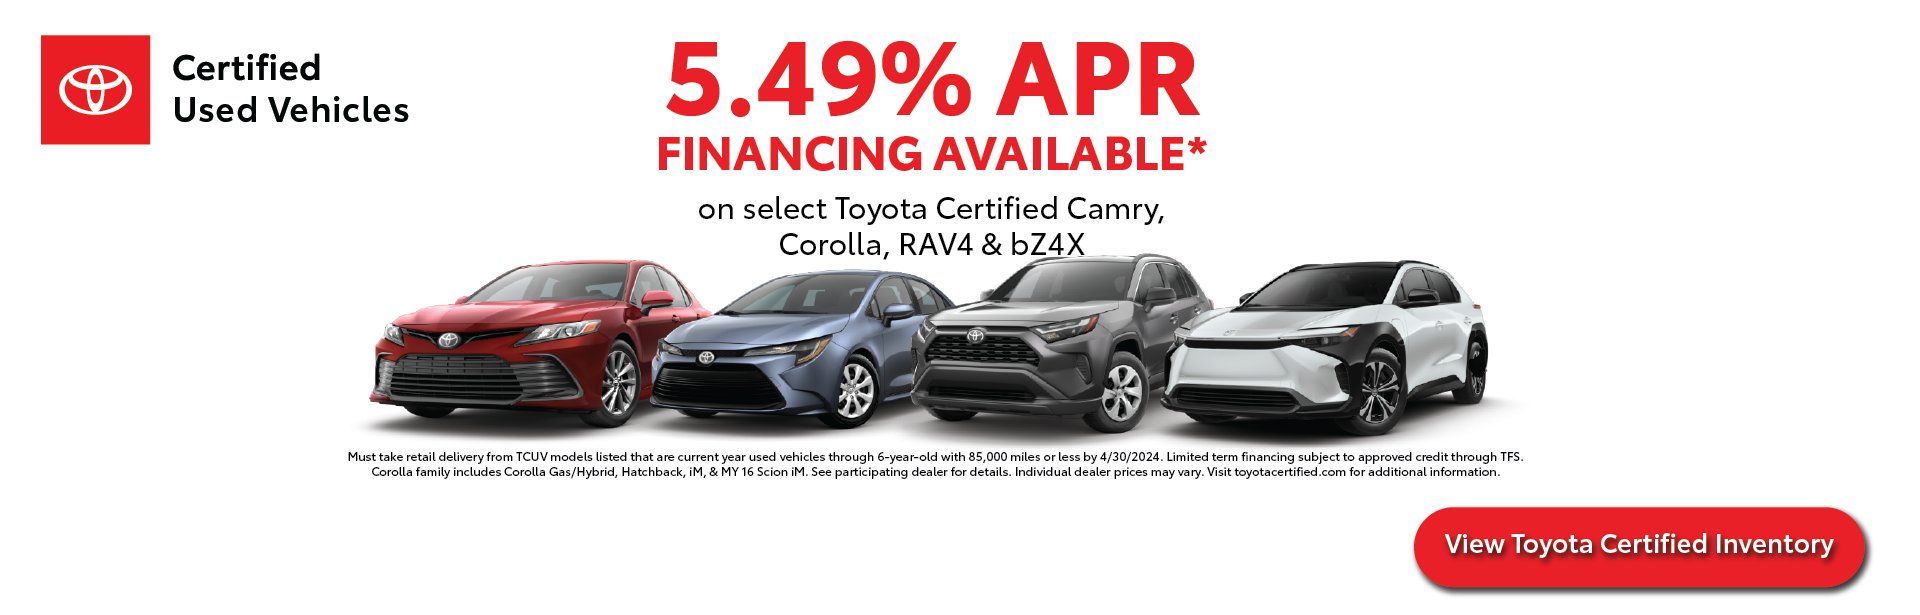 Toyota Certified Used Vehicle Offer | Coad Toyota in Cape Girardeau MO